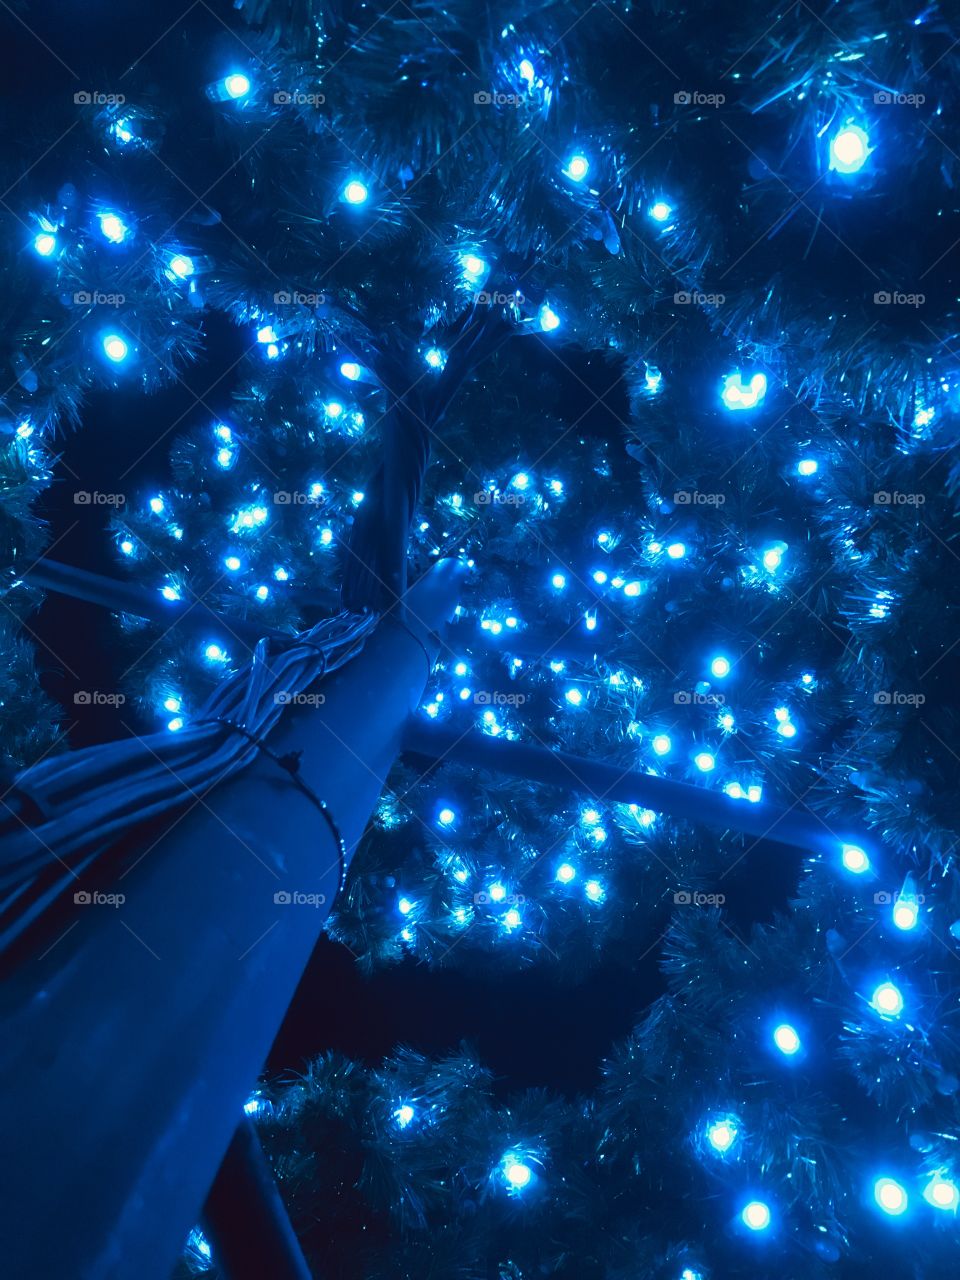 Spiraling blue Christmas lights from underneath 🎄